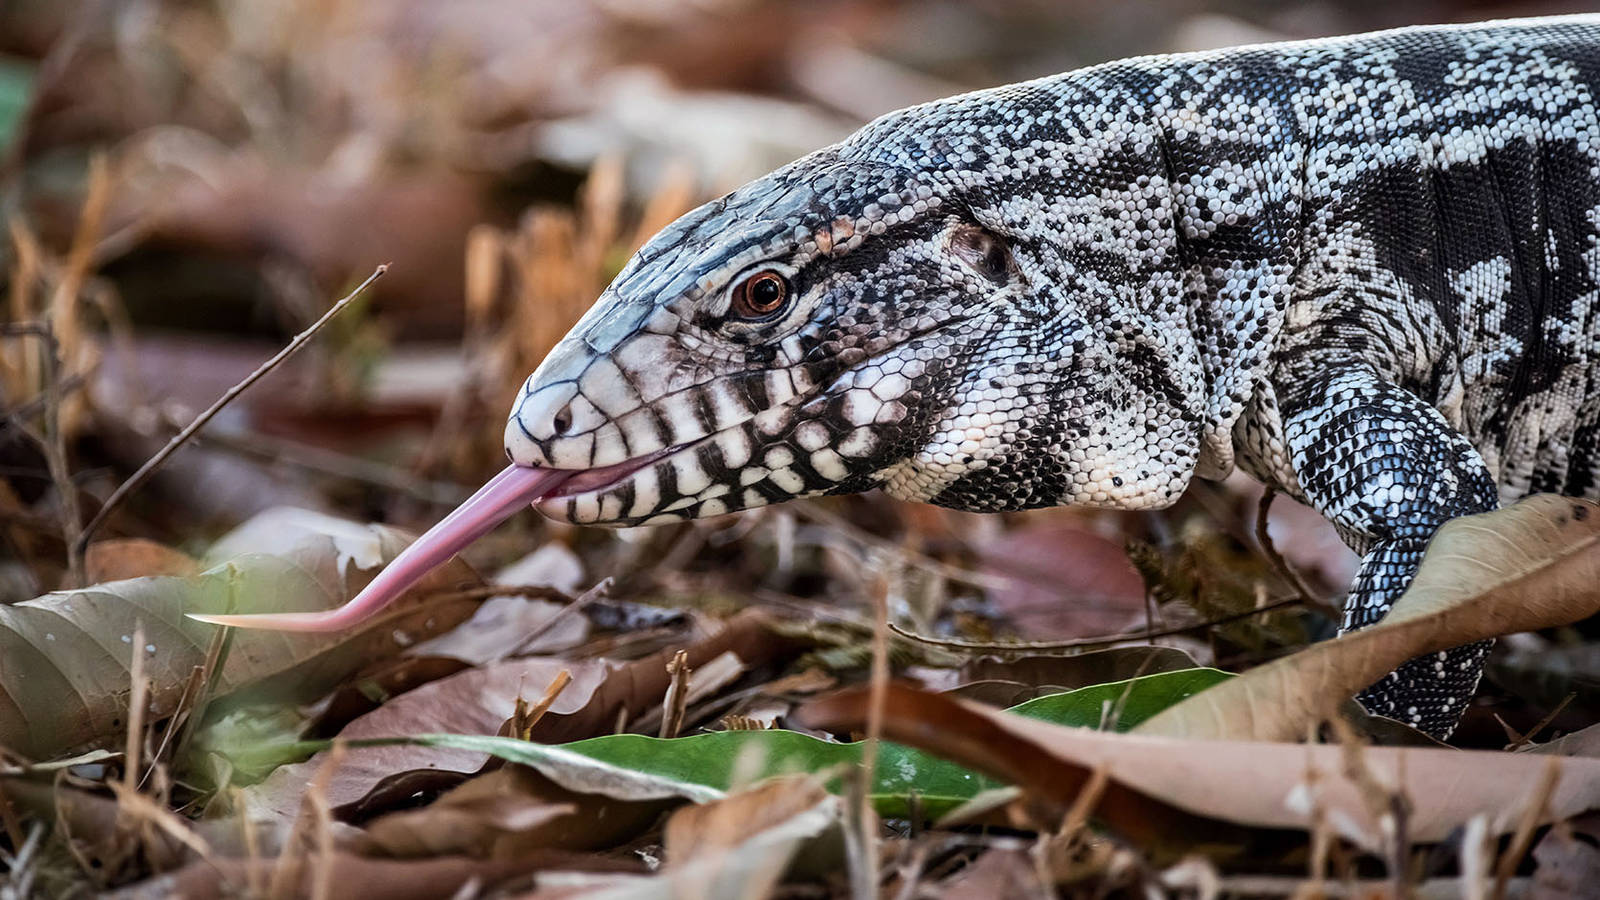 What would you use to trap a tegu? - The Wildlife Society